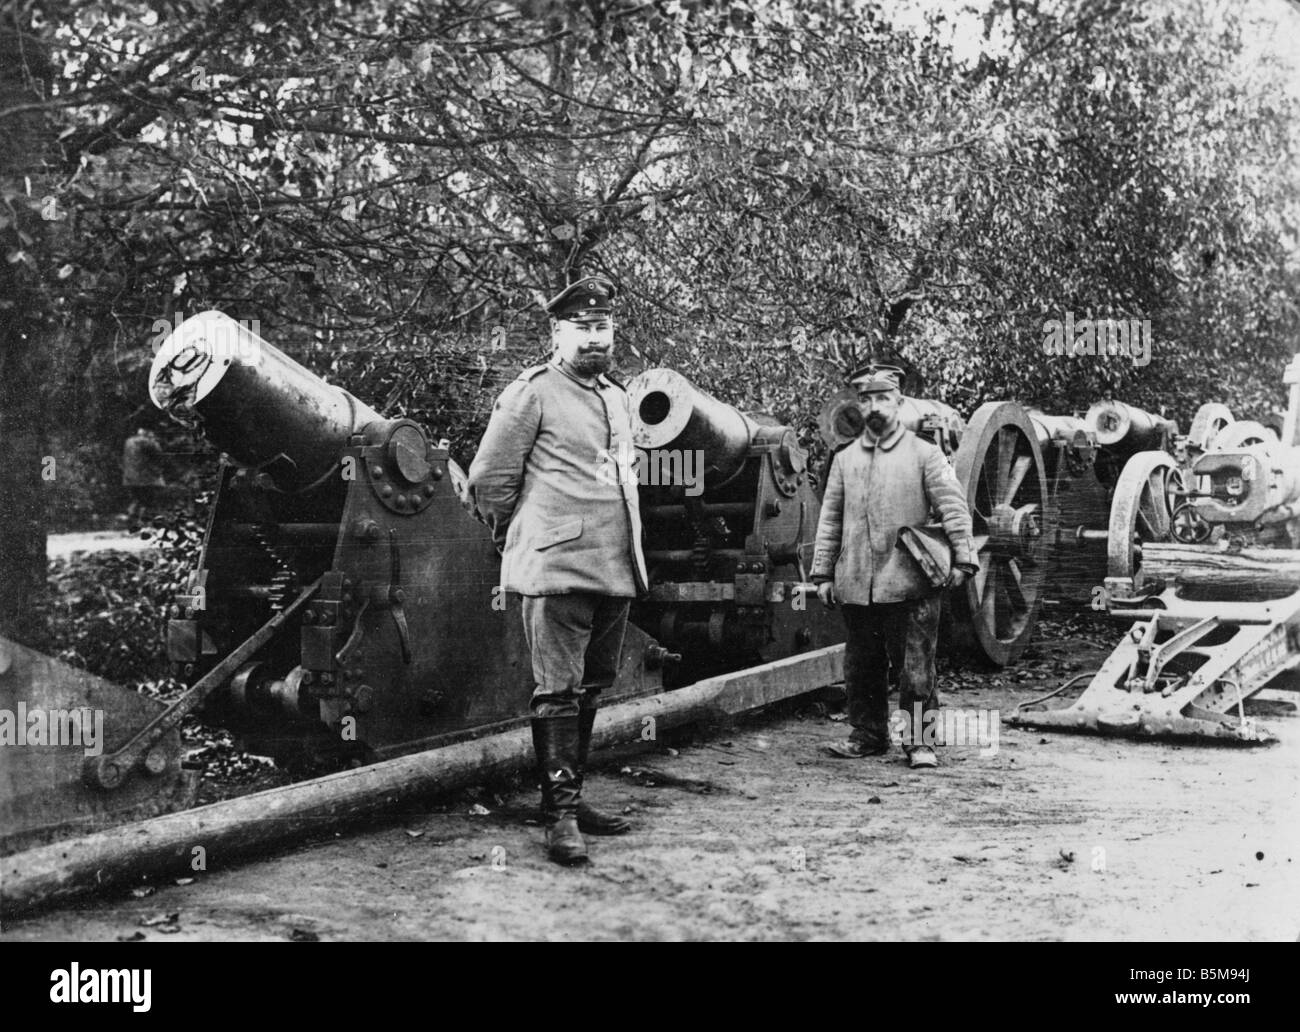 2 G55 O1 1916 25 Captured Russian cannons East Front History World War I Eastern Front The German Army in Kovno Lithuania Captur Stock Photo